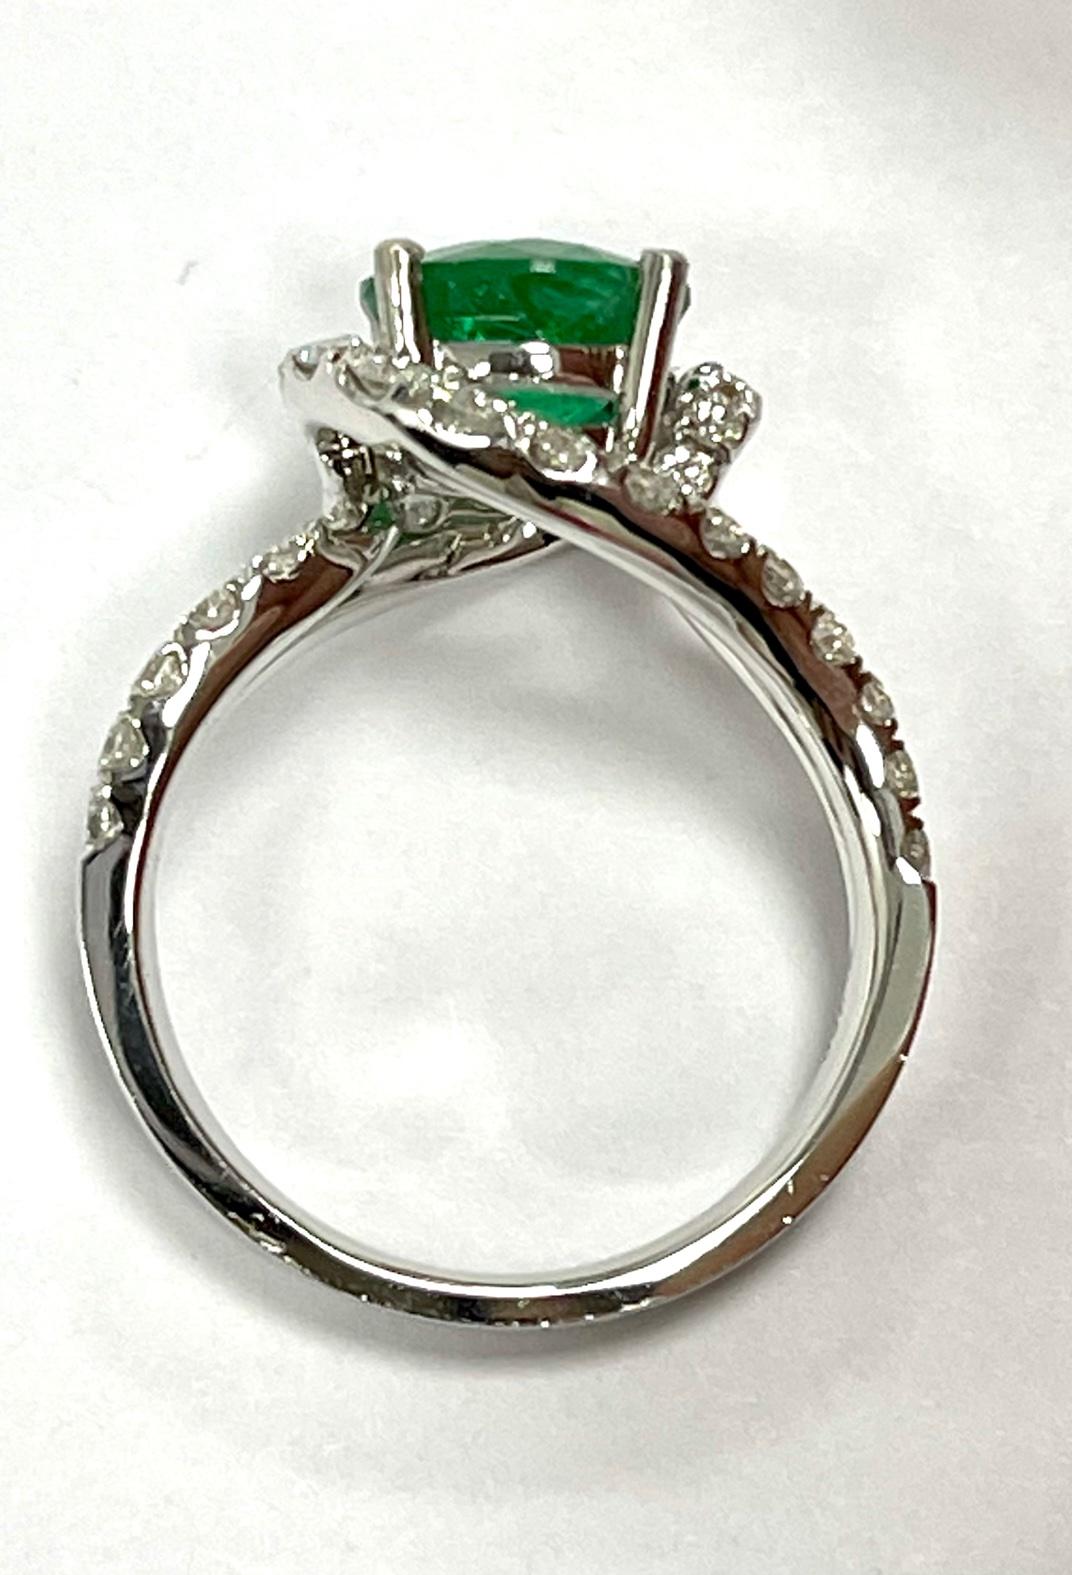 Round Cut 1.88 Carat Emerald Diamond Cocktail Ring For Sale